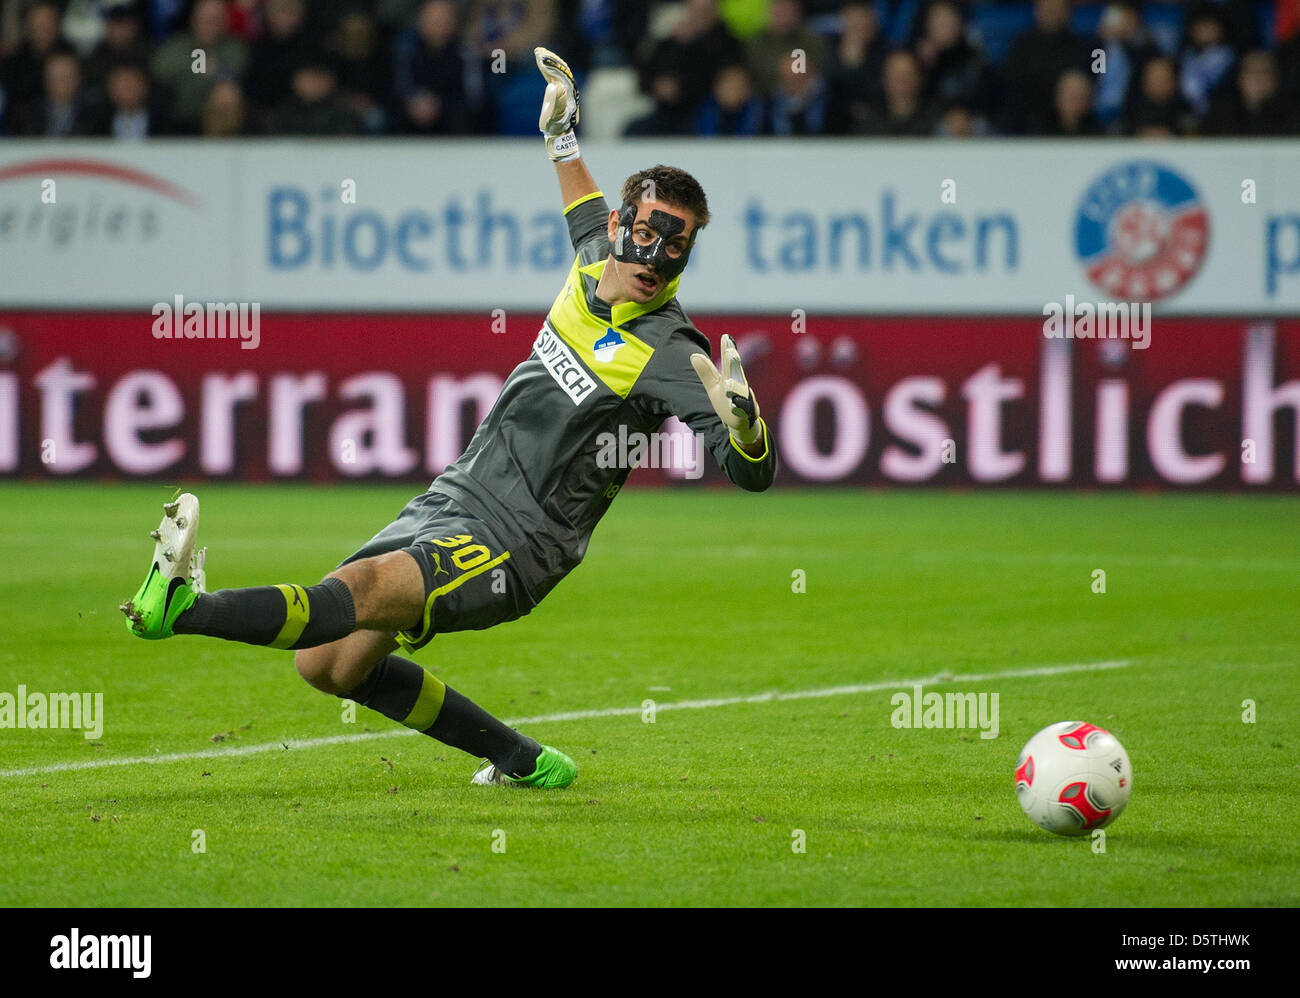 Hoffenheim's goalkeeper Koen Casteels cannot stop the ball during the German Bundesliga soccer match 1899 Hoffenheim vs Bayer 04 Leverkusen at Rhein Neckar Arena in Sinsheim, Germany, 25 November 2012. Photo: Uwe Anspach  (ATTENTION: EMBARGO CONDITIONS! The DFL permits the further utilisation of up to 15 pictures only (no sequntial pictures or video-similar series of pictures allow Stock Photo